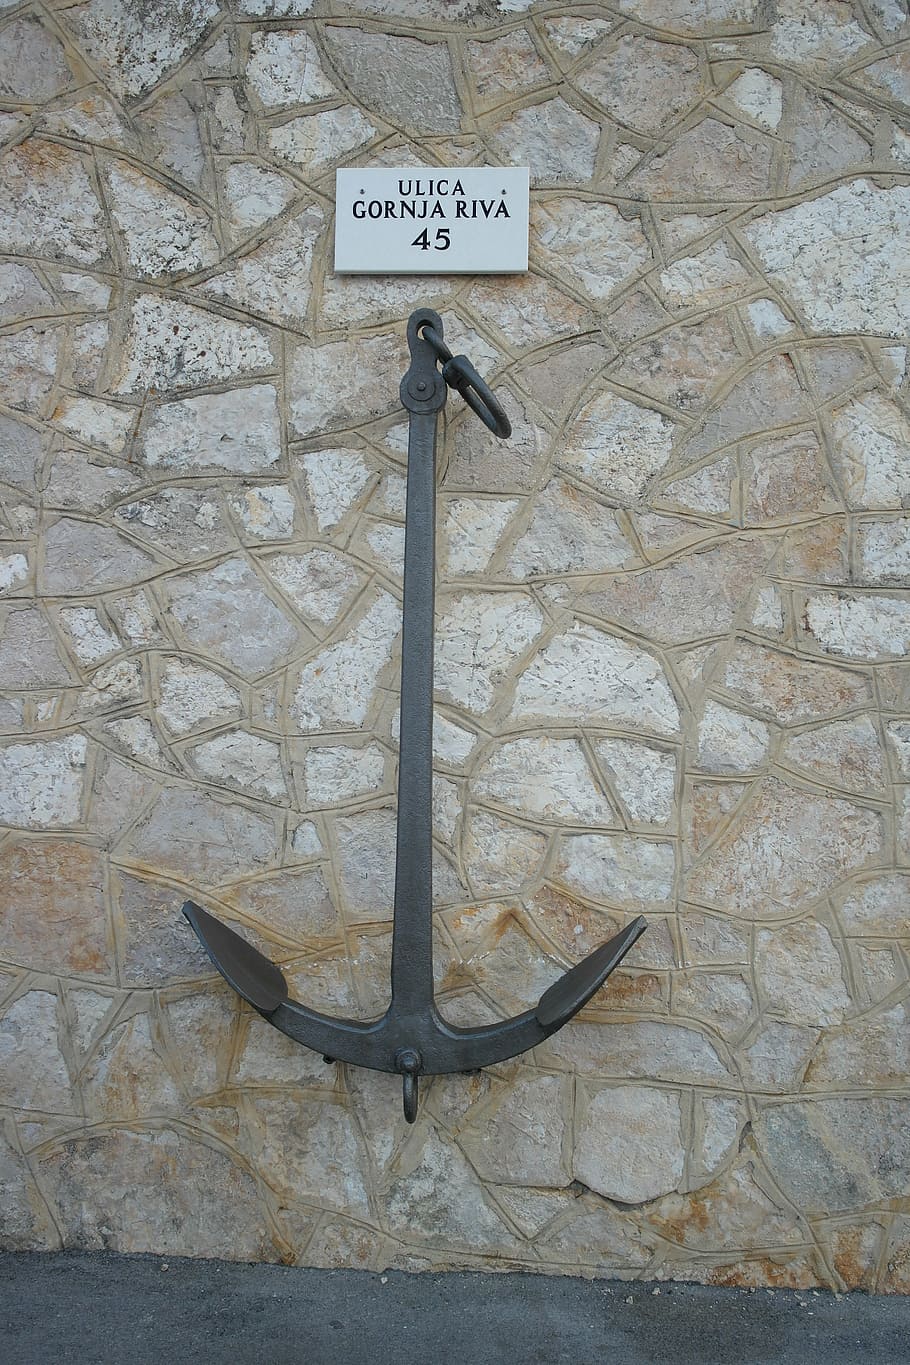 anchor, sign, symbol, communication, text, western script, wall - building feature, information, guidance, information sign